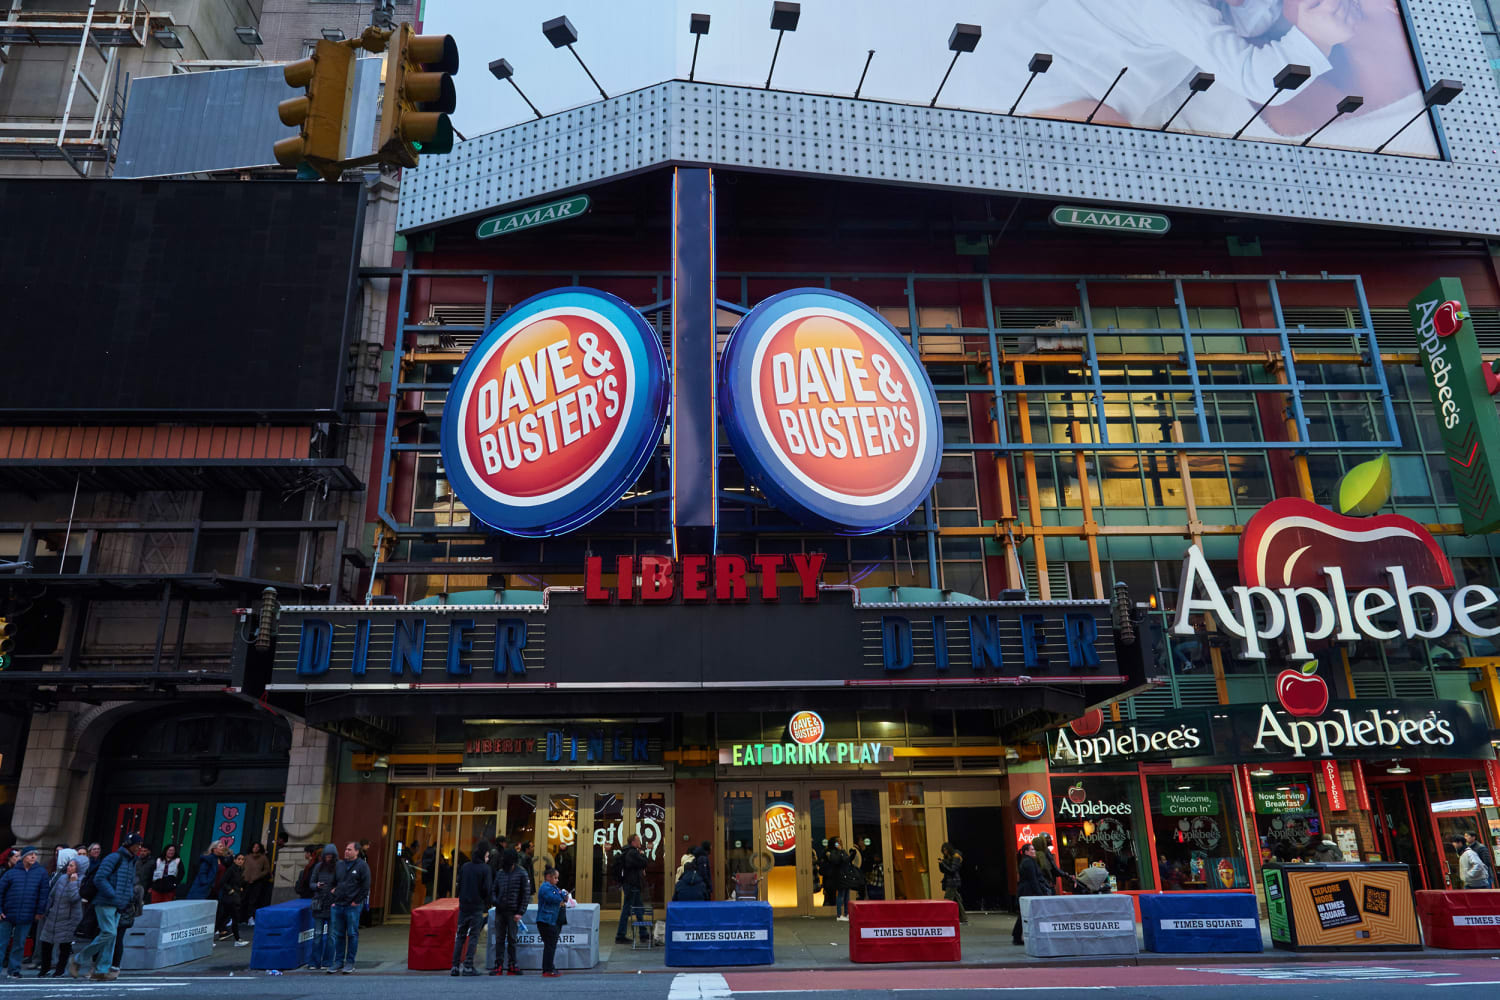 Dave & Buster’s lets players bet against each other on arcade games